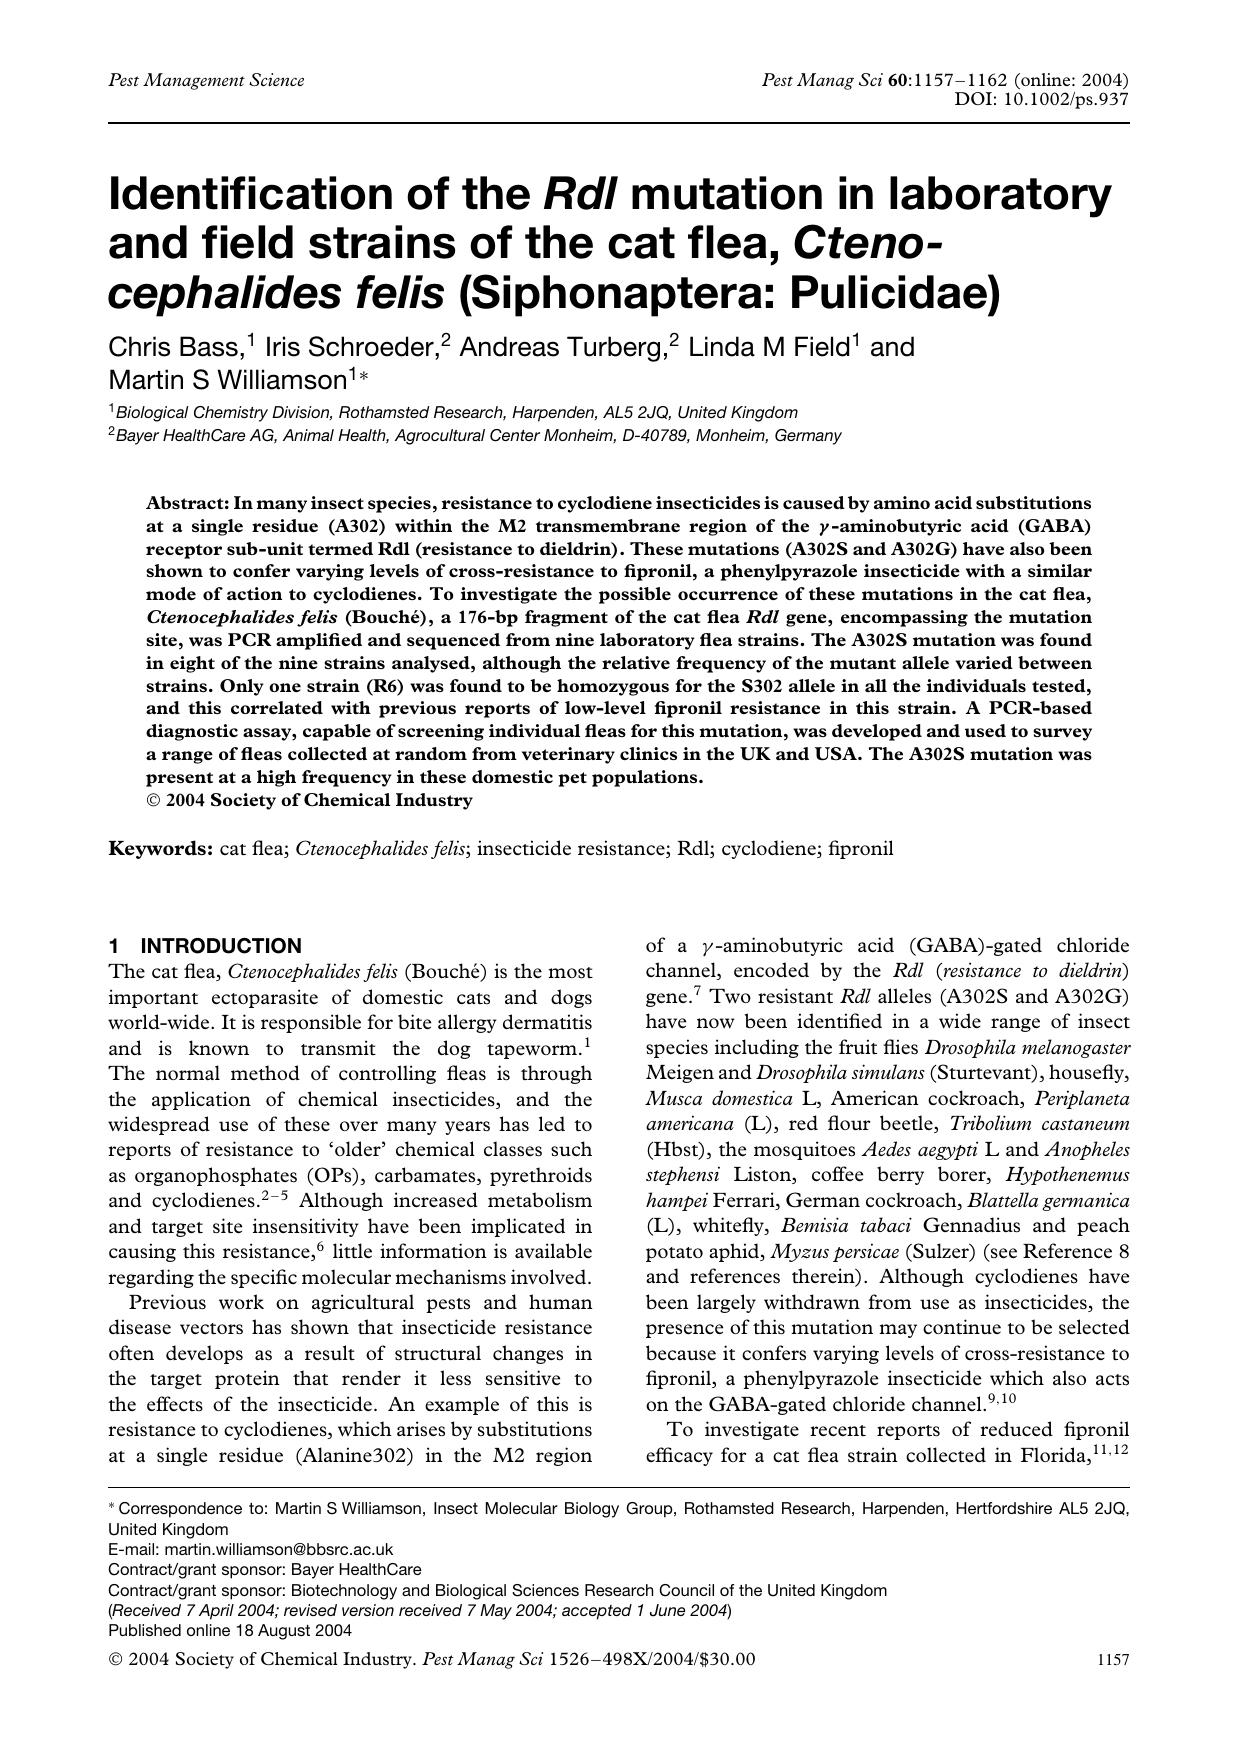 Identification of the Rdl mutation in laboratory and field strains of the cat flea, Ctenocephalides felis (Siphonaptera: Pulicidae) by Unknown